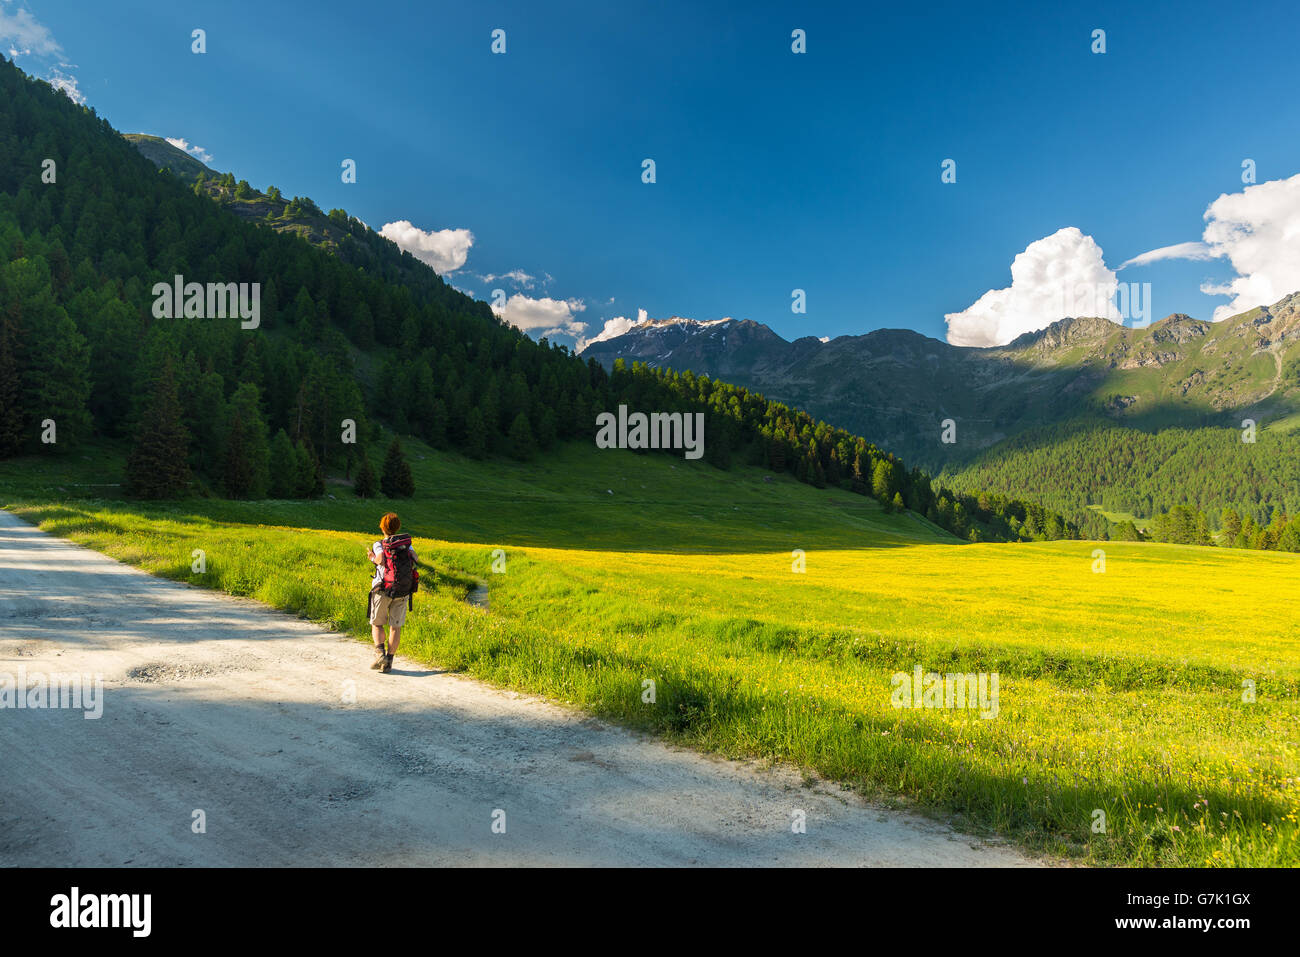 Backpacker hiking in idyllic landscape. Summer adventures and exploration on the Alps, through blooming meadow and green woodlan Stock Photo